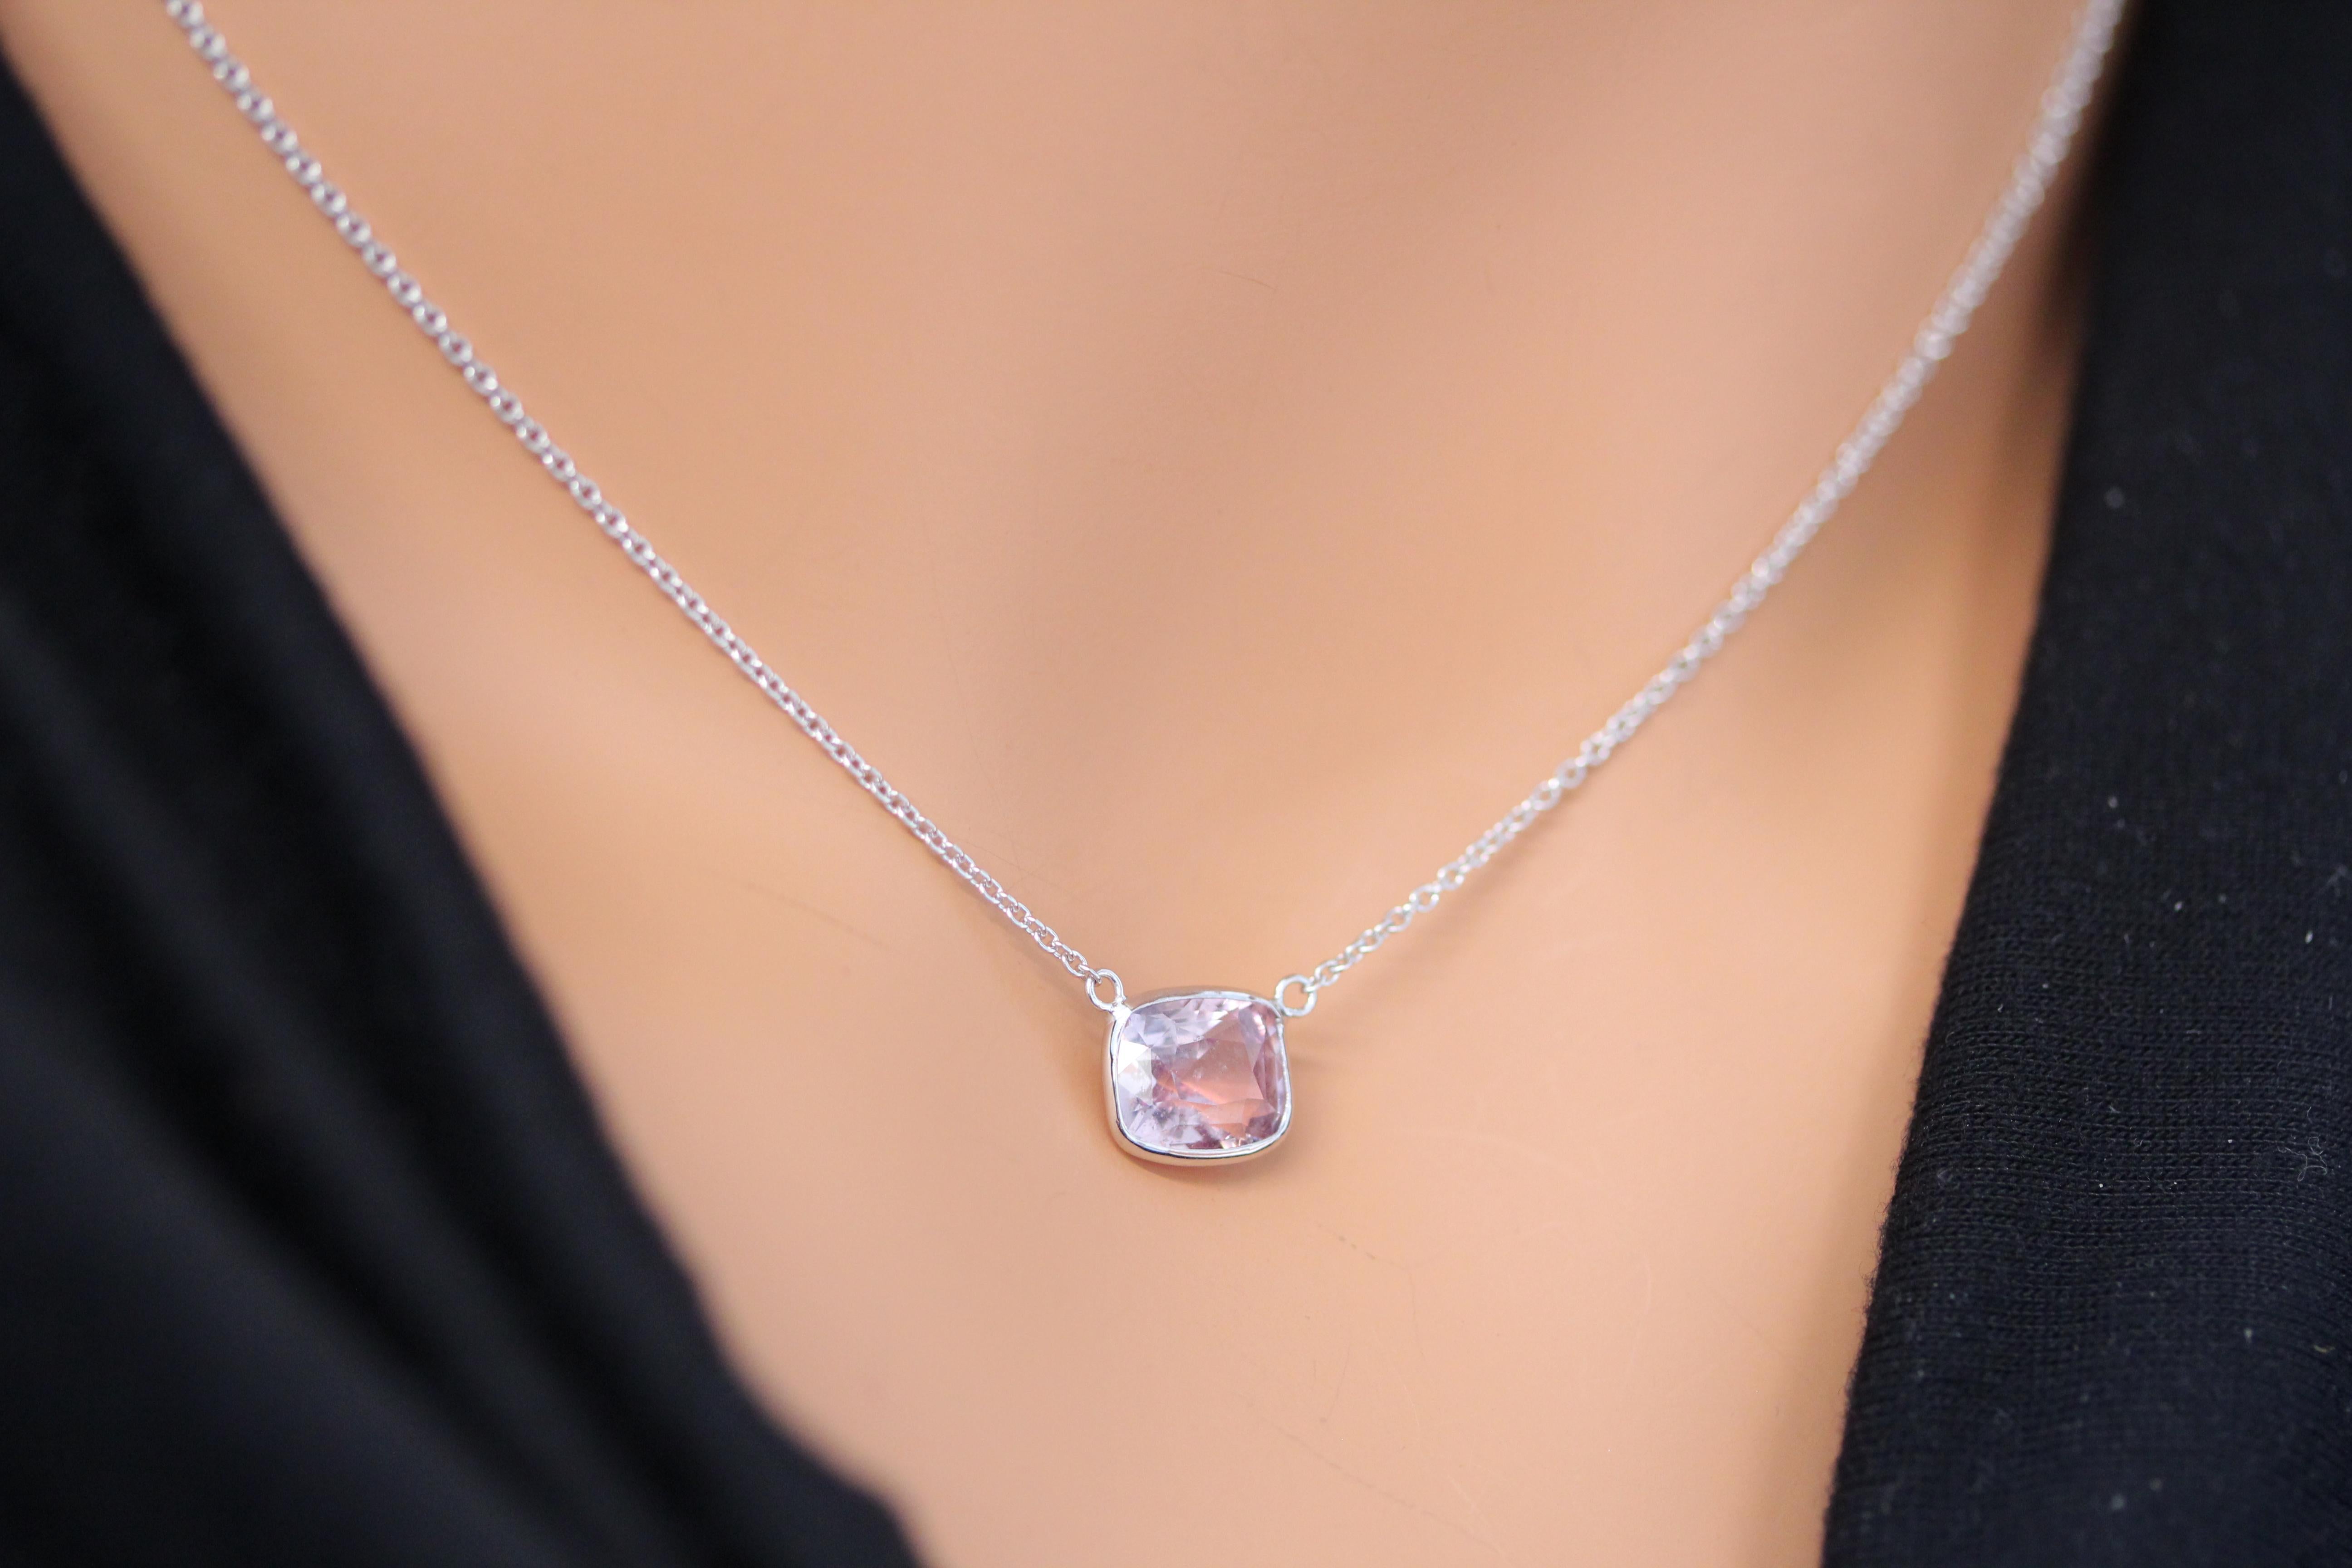 Contemporary 3.02 Carat Cushion Sapphire Peach Pink Fashion Necklaces In 14k White Gold For Sale